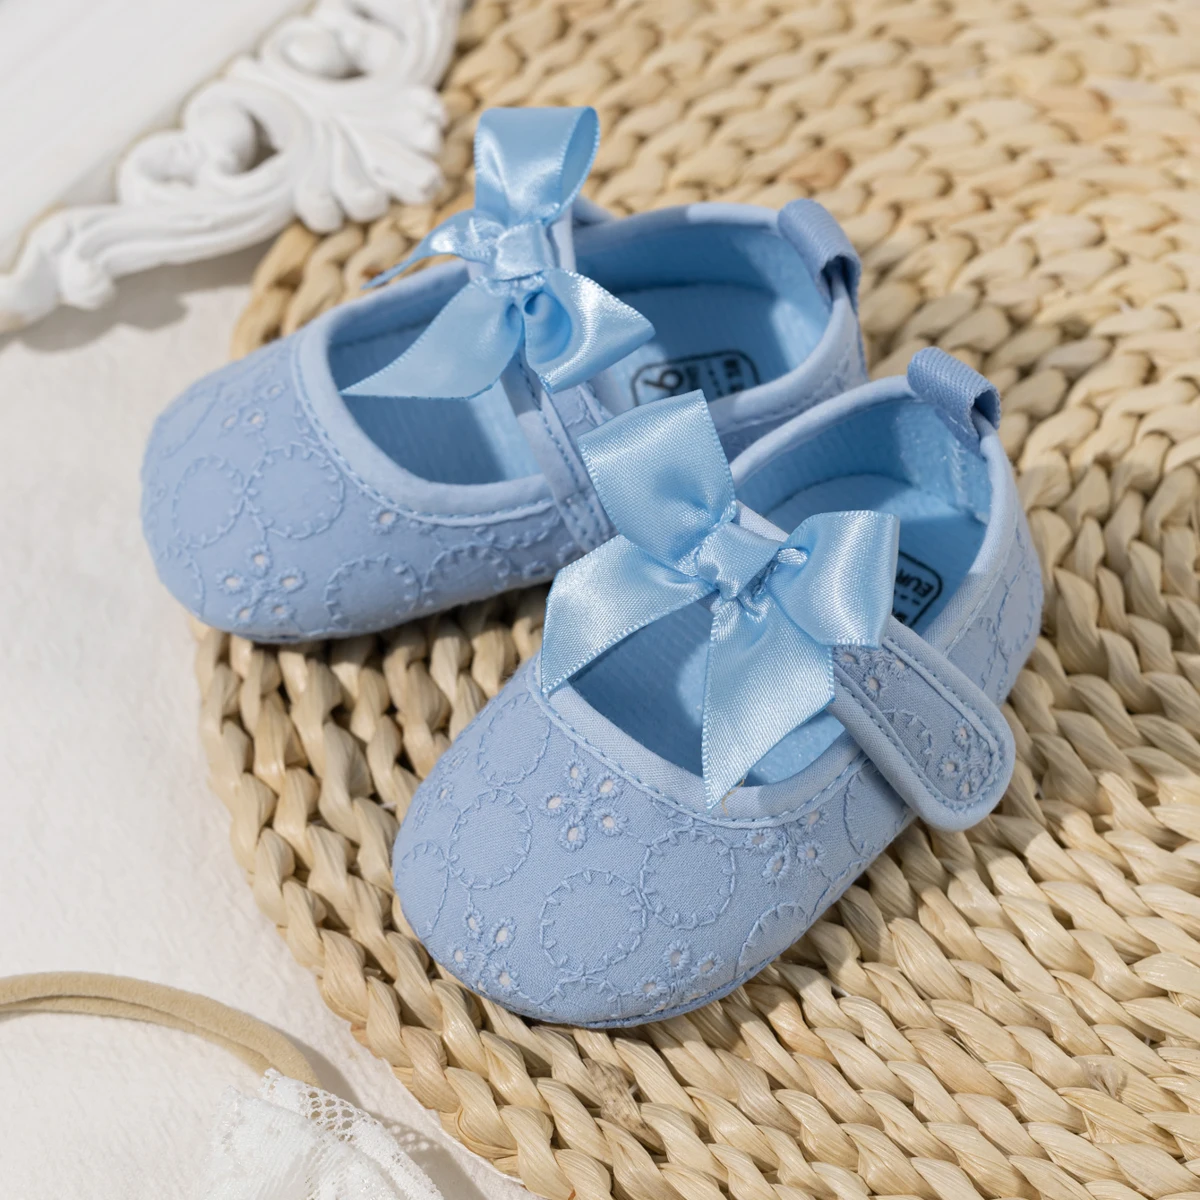 

KIDSUN Baby Girls Dress Shoes Infant Bowknot Mary Jane Wedding Party Princess Shoes Cotton Soft Sole First Walkers Crib Shoes